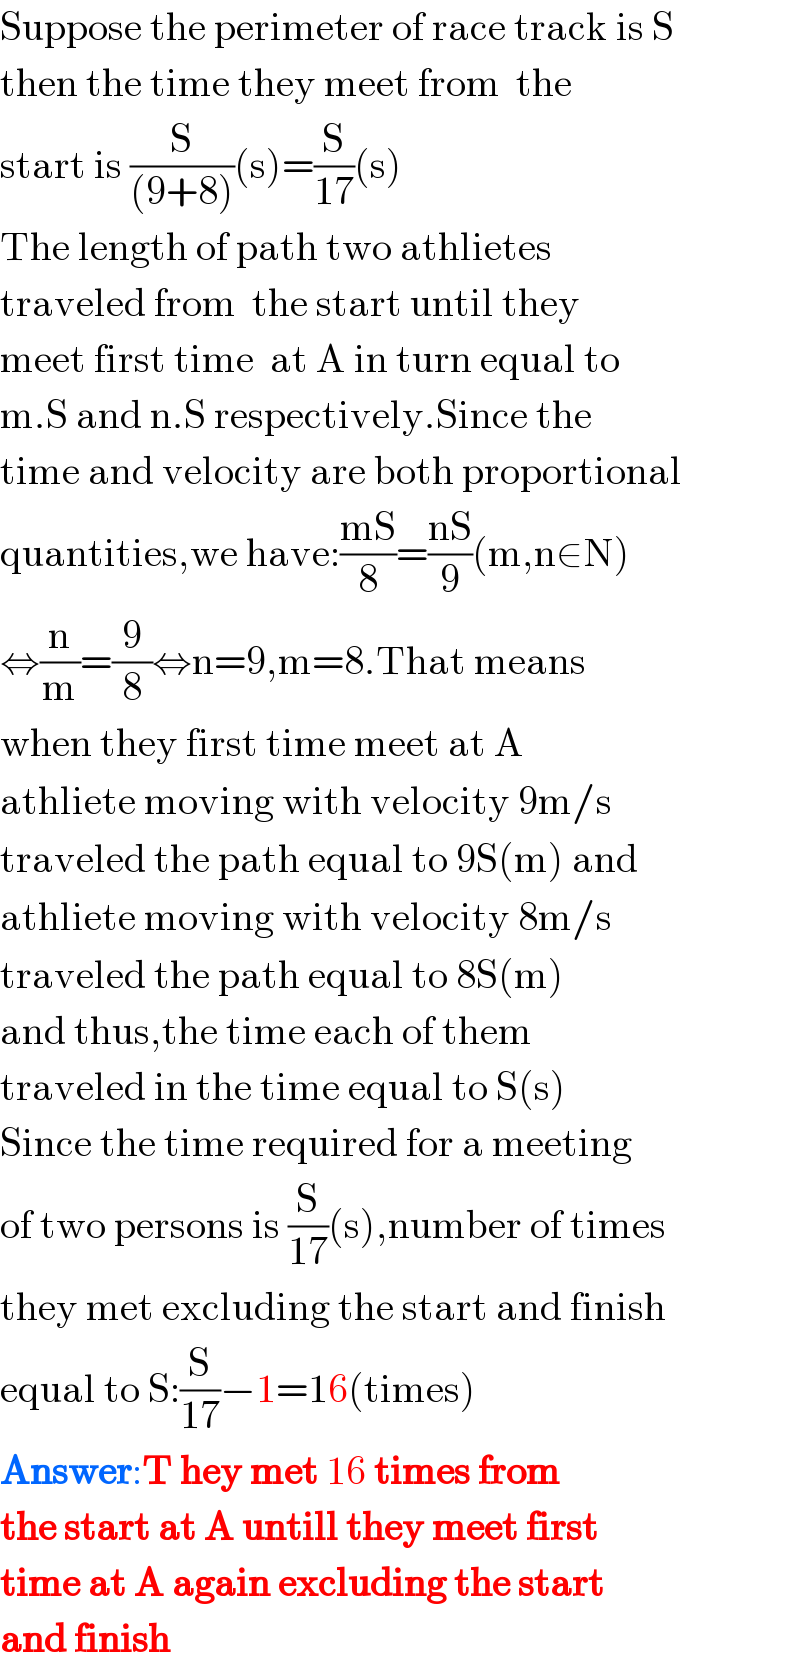 Suppose the perimeter of race track is S  then the time they meet from  the  start is (S/((9+8)))(s)=(S/(17))(s)  The length of path two athlietes  traveled from  the start until they   meet first time  at A in turn equal to  m.S and n.S respectively.Since the  time and velocity are both proportional  quantities,we have:((mS)/8)=((nS)/9)(m,n∈N)  ⇔(n/m)=(9/8)⇔n=9,m=8.That means   when they first time meet at A   athliete moving with velocity 9m/s  traveled the path equal to 9S(m) and  athliete moving with velocity 8m/s  traveled the path equal to 8S(m)  and thus,the time each of them  traveled in the time equal to S(s)  Since the time required for a meeting   of two persons is (S/(17))(s),number of times   they met excluding the start and finish  equal to S:(S/(17))−1=16(times)  Answer:T hey met 16 times from  the start at A untill they meet first   time at A again excluding the start  and finish  